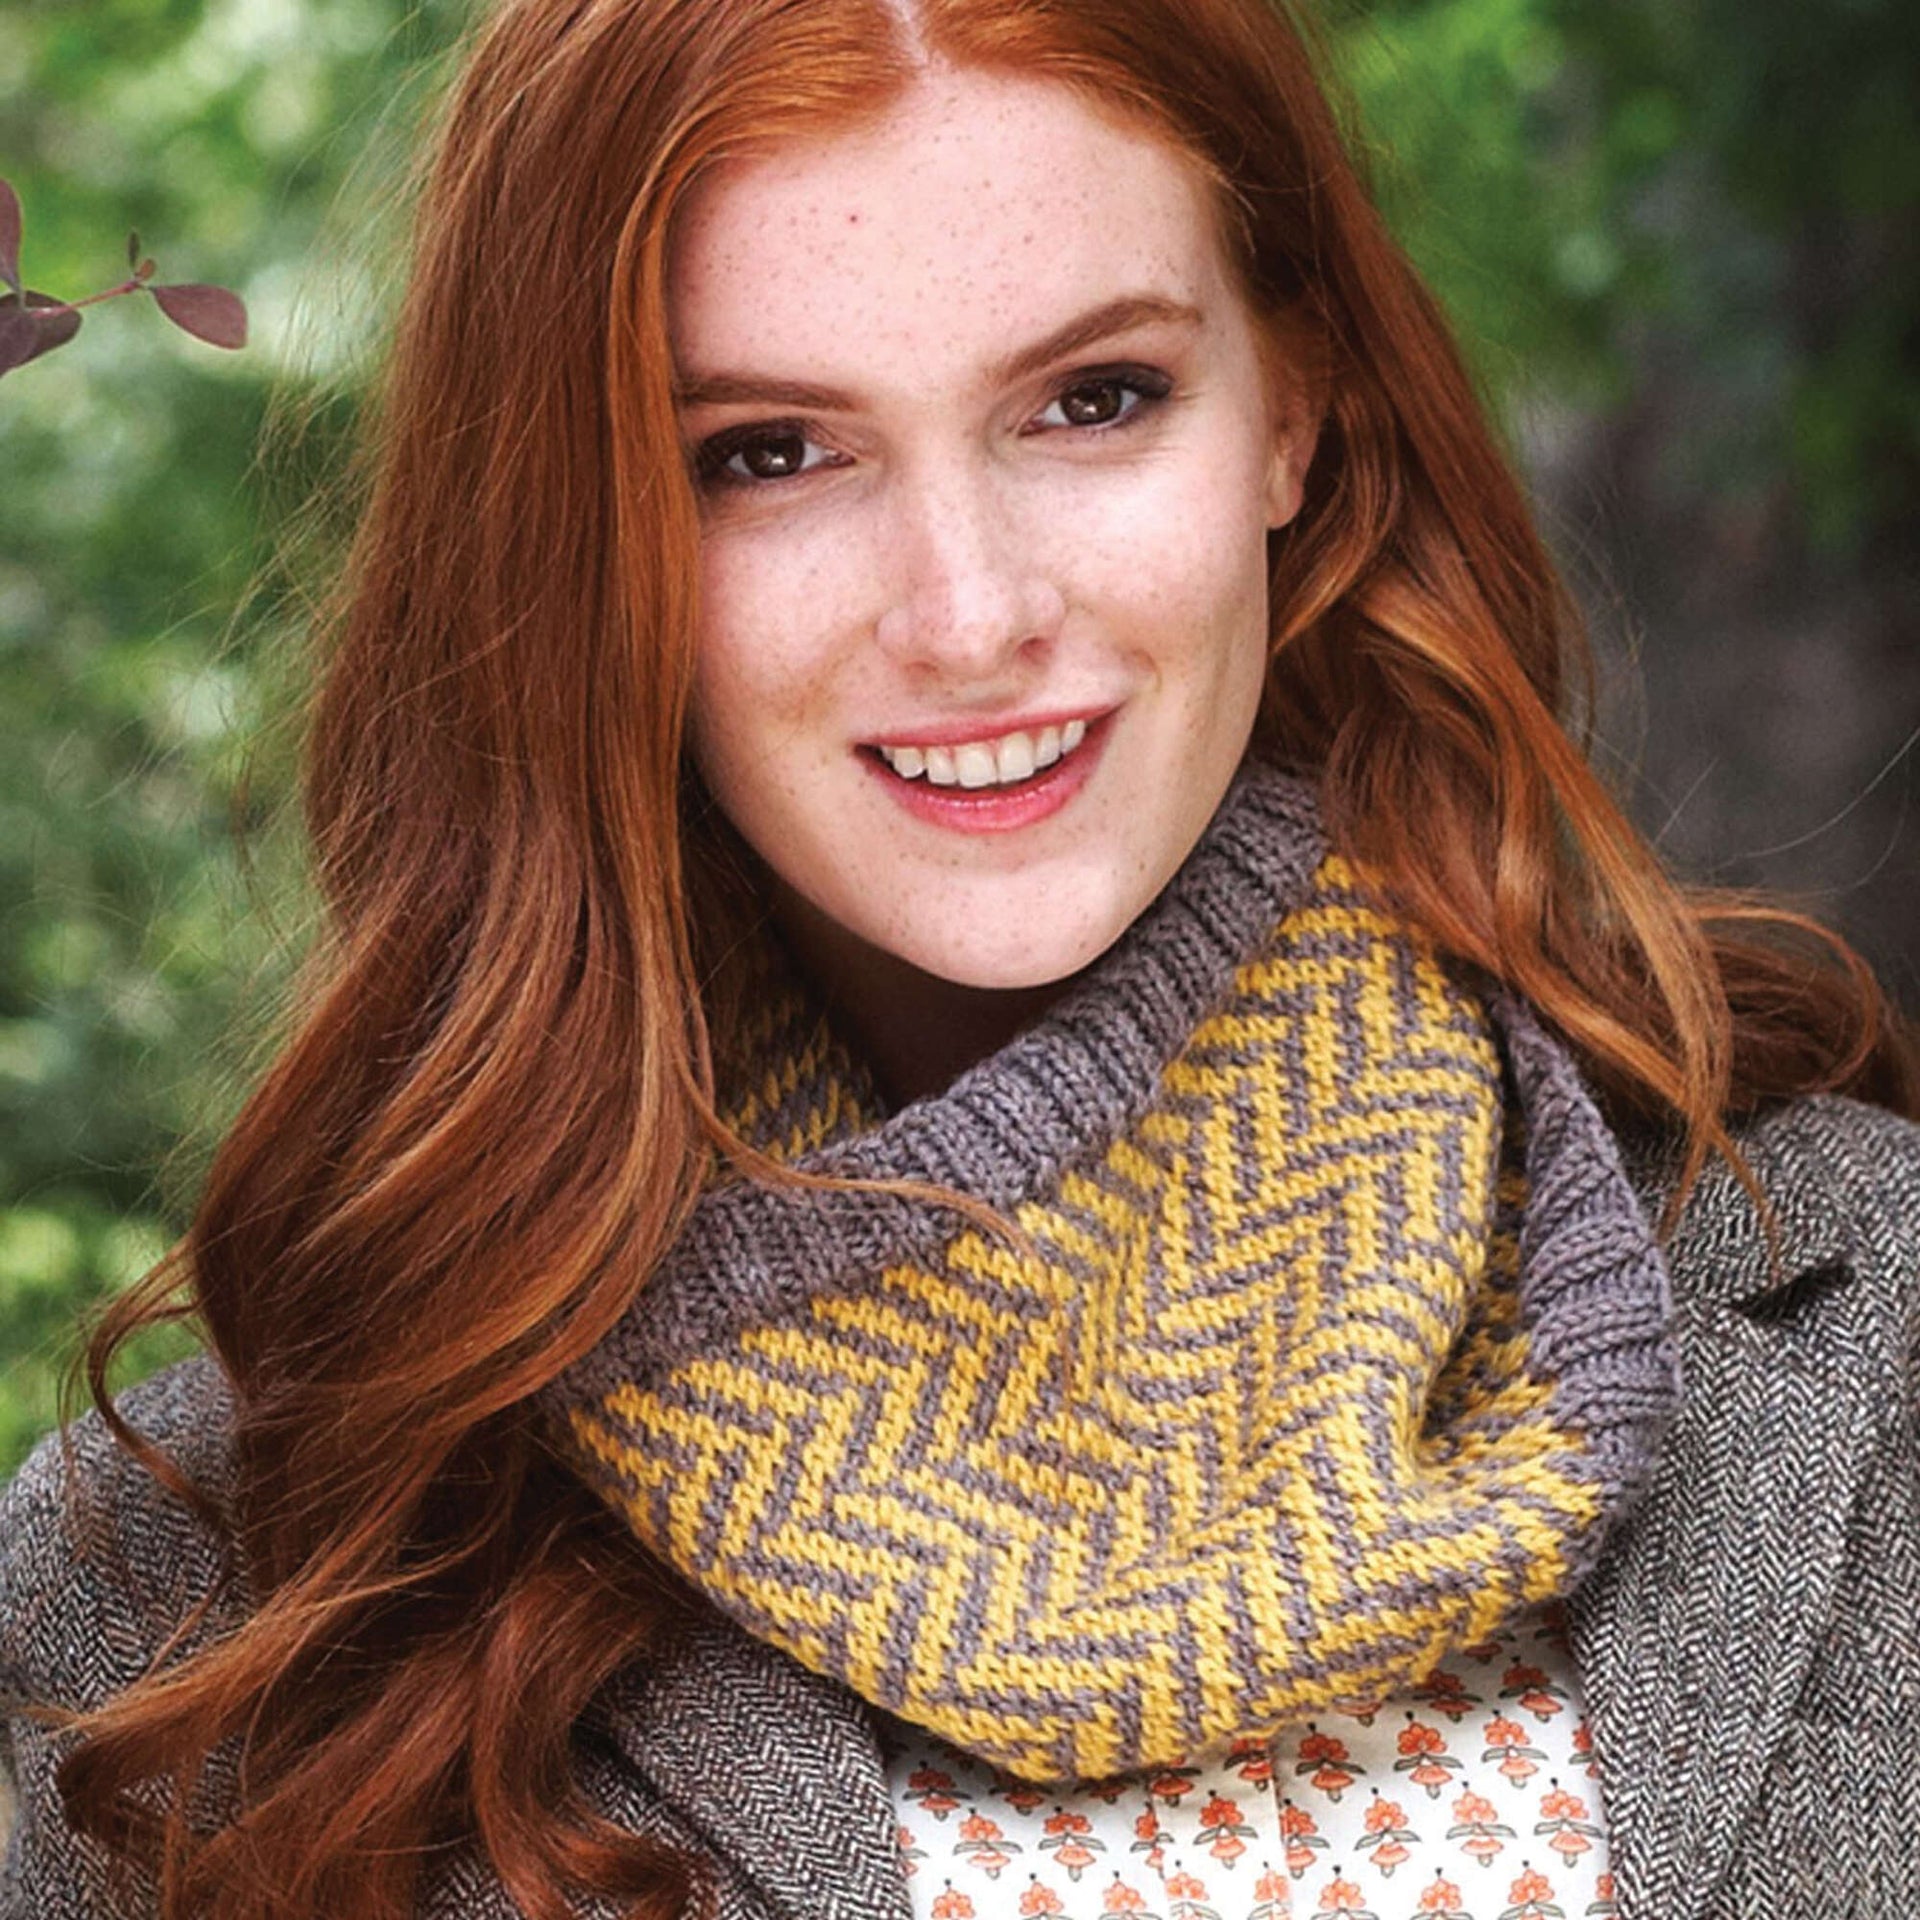 Patons In A Jiffy Cowl Pattern